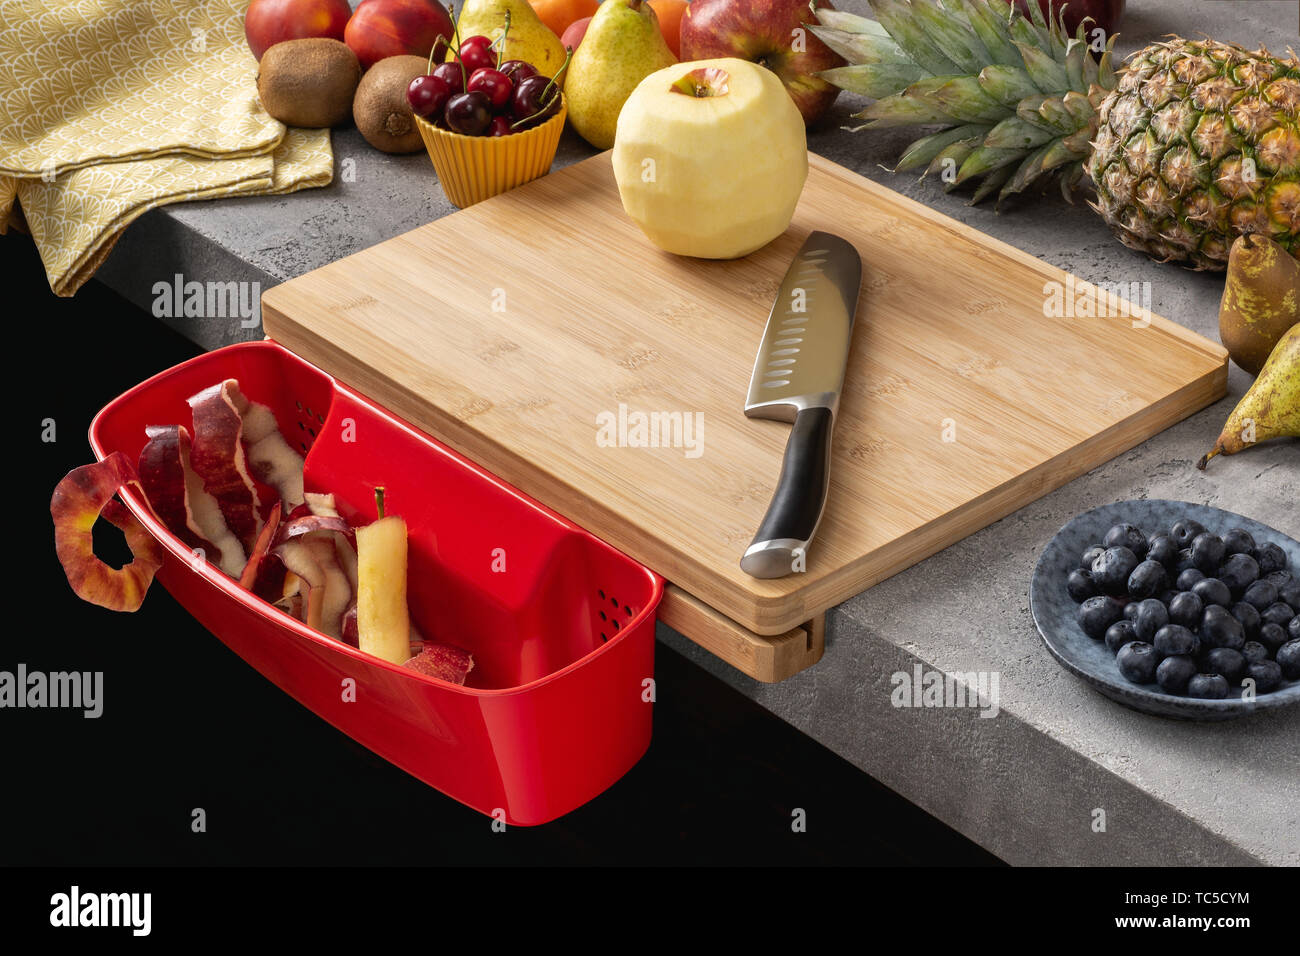 Wood Cutting Board with Waste Container, Santoku Chef Knife and Fresh Fruits. Healthy Eating Concept. Stock Photo